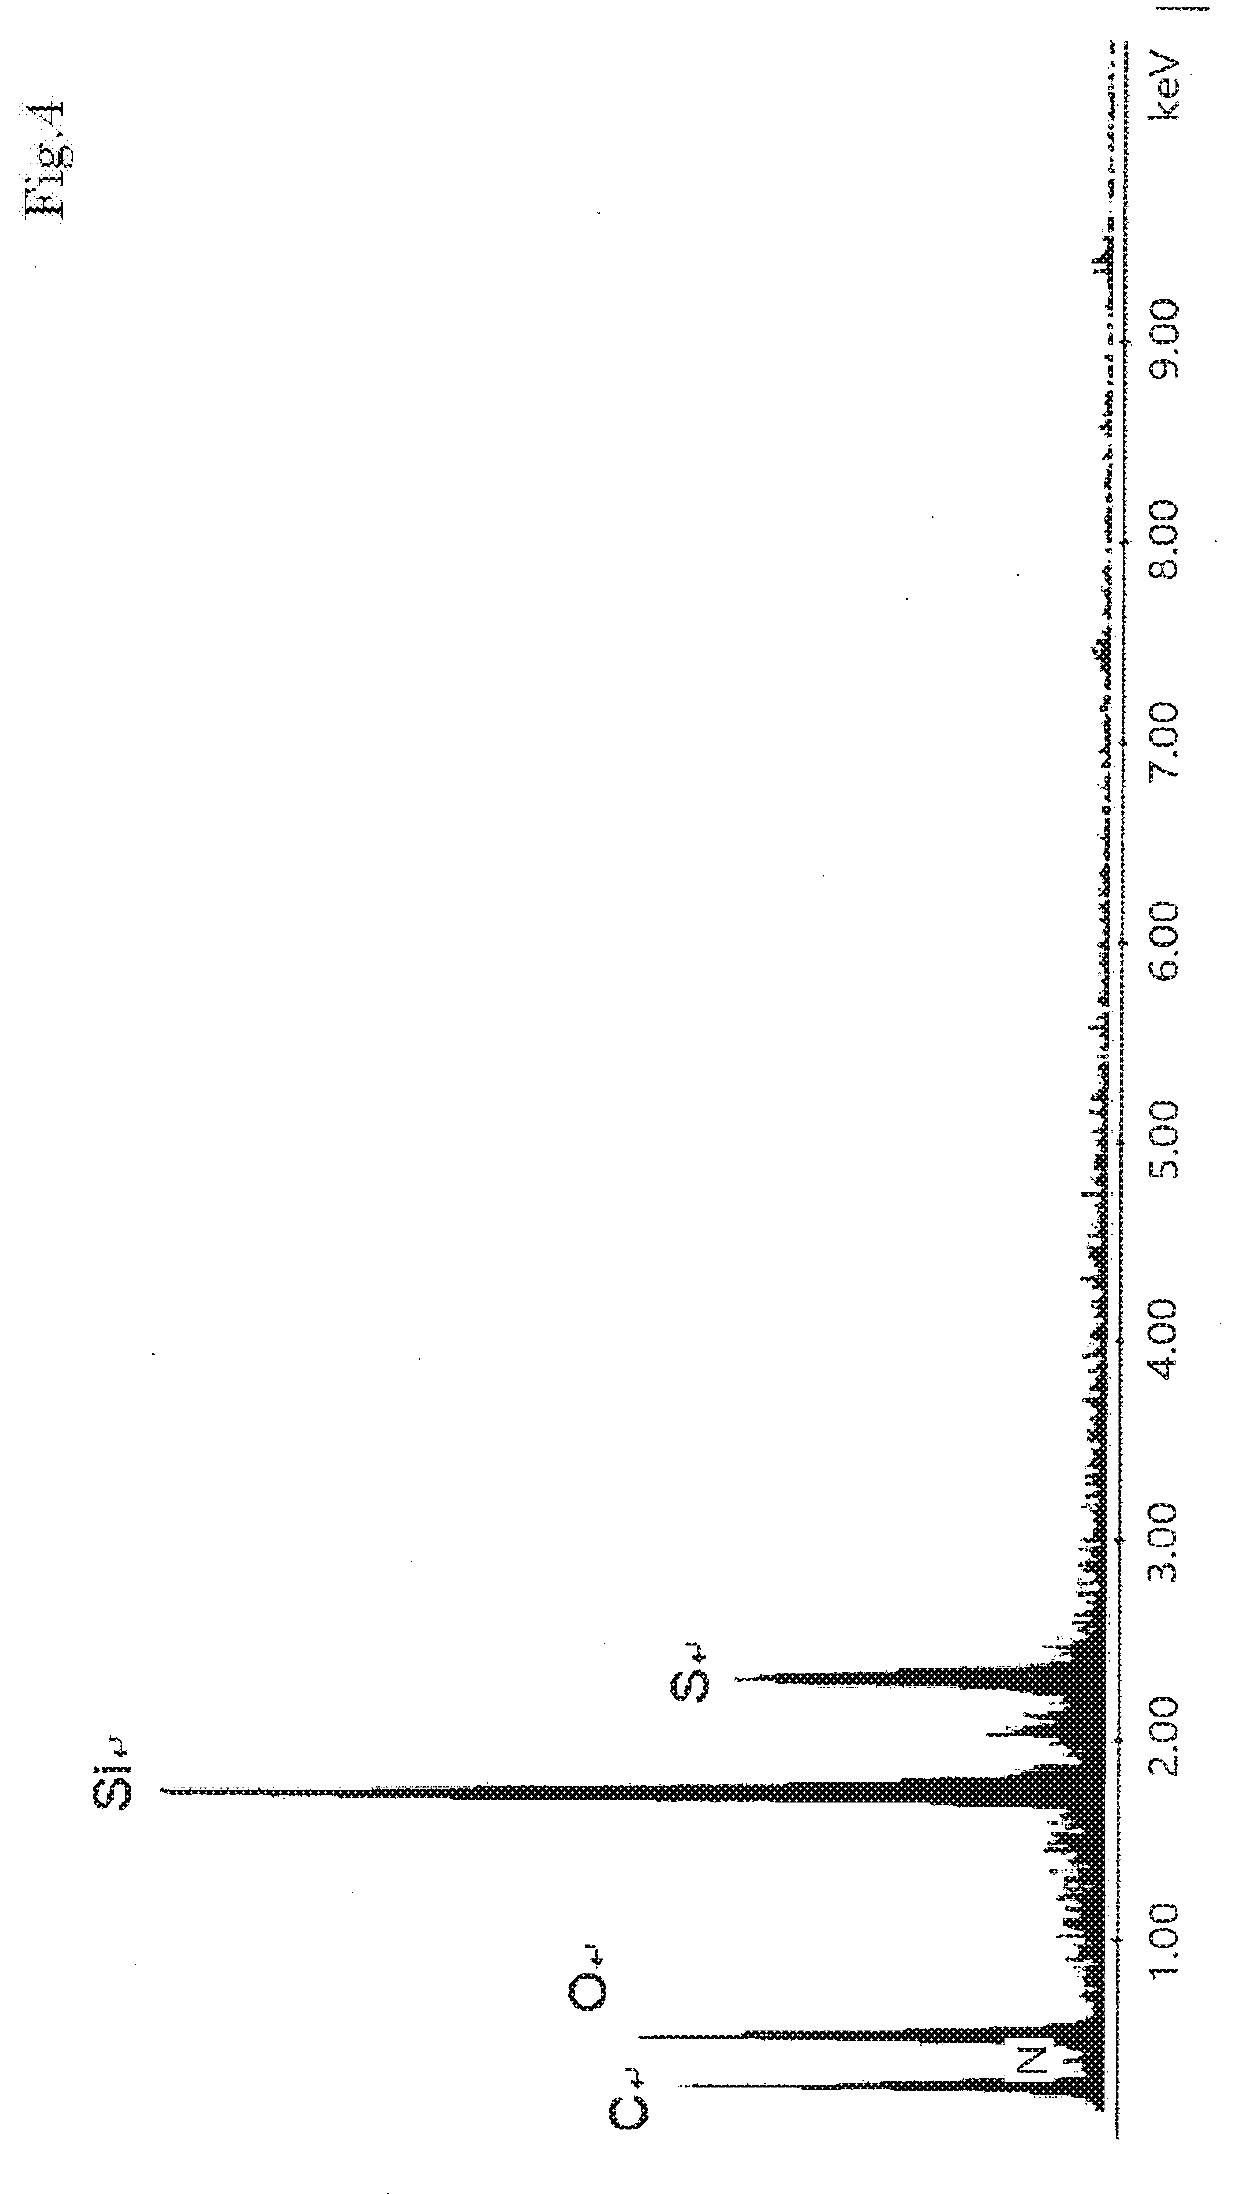 Composite semipermeable membrane and method for manufacturing same